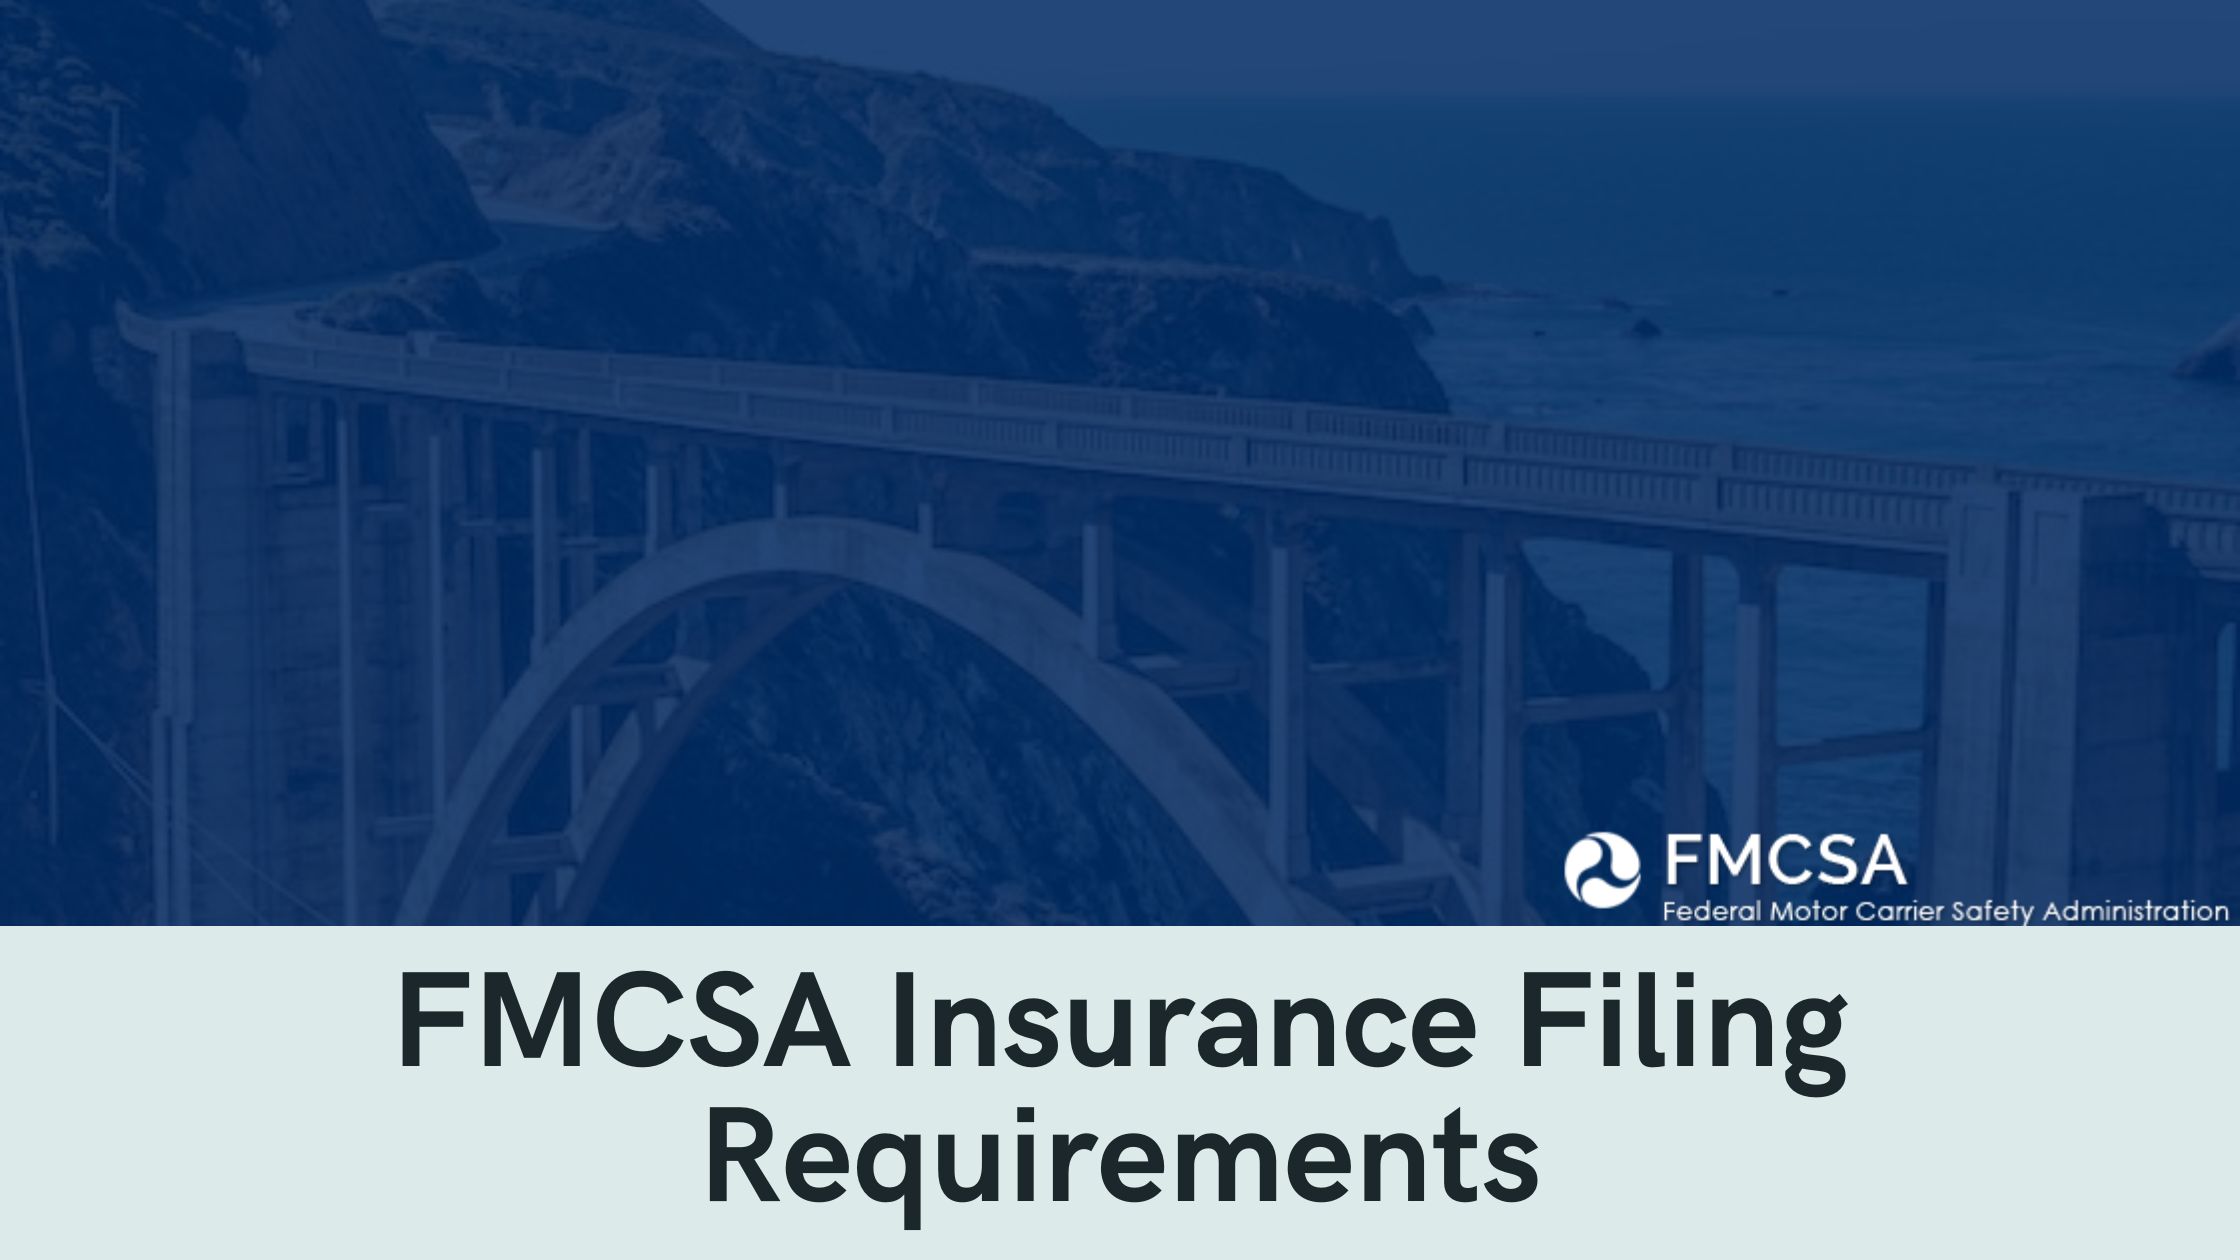 Understanding the FMCSA’s Insurance Requirements for Motor Carriers